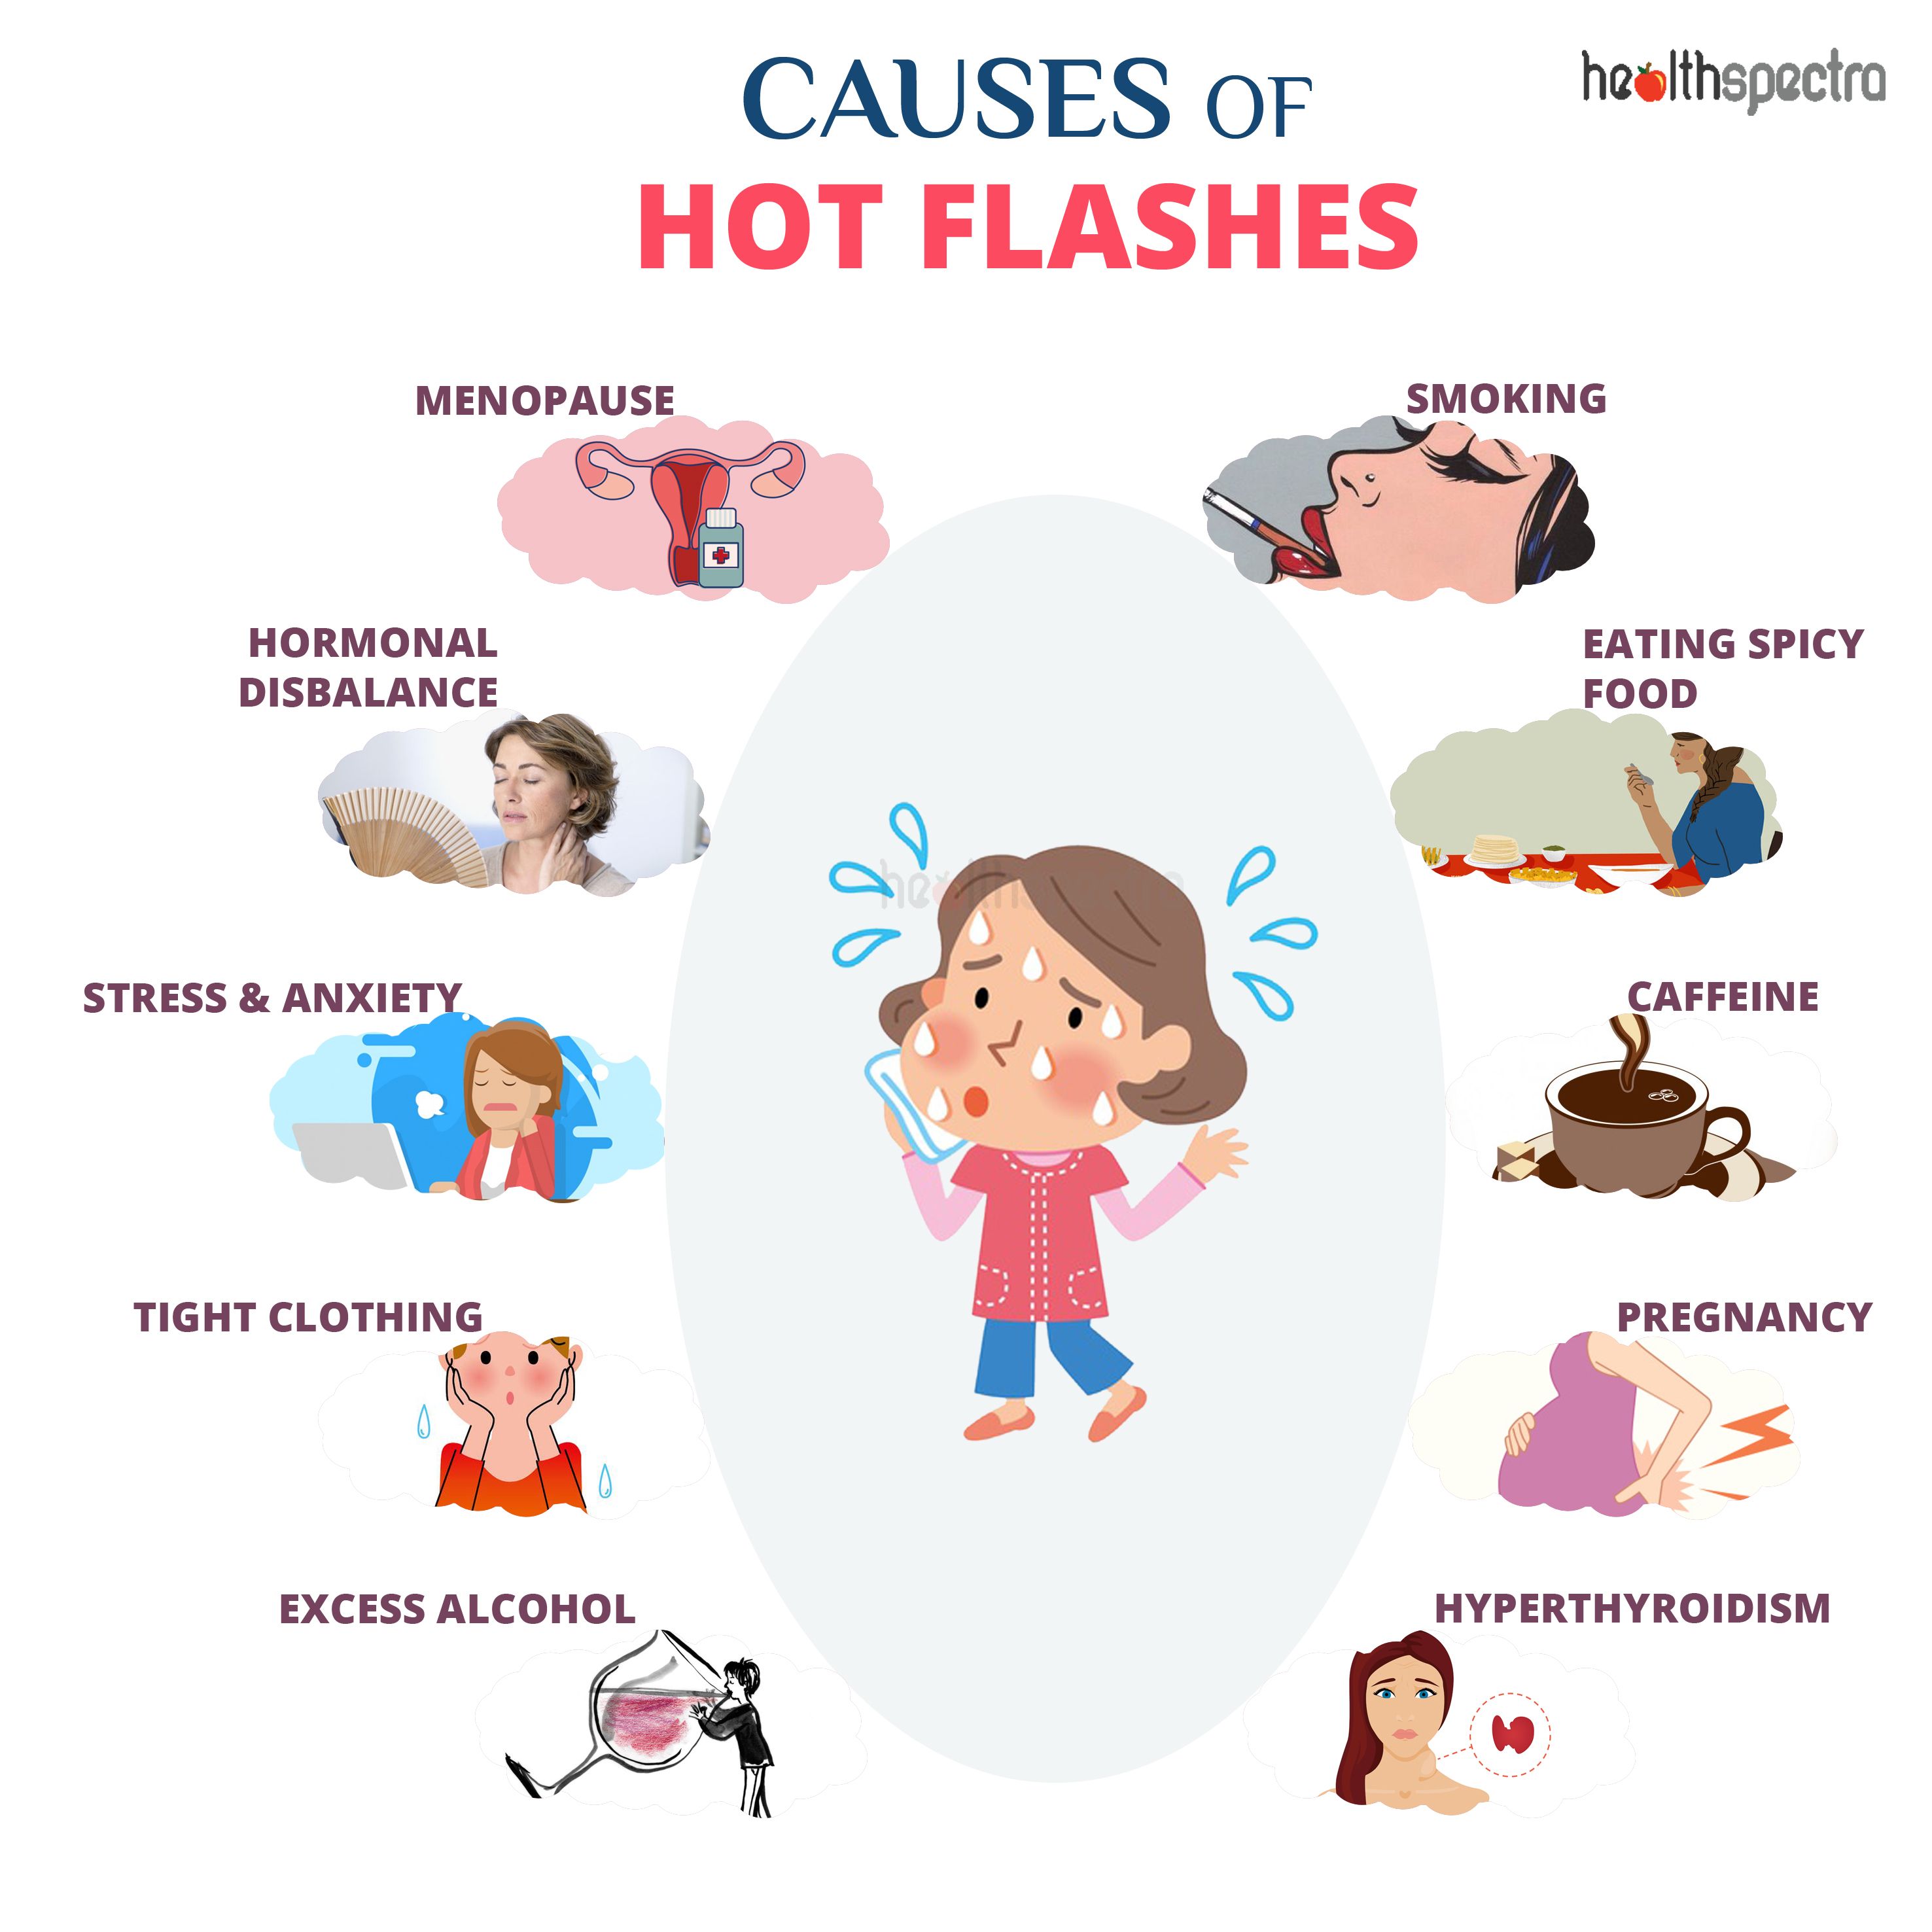 Causes of Hot Flashes